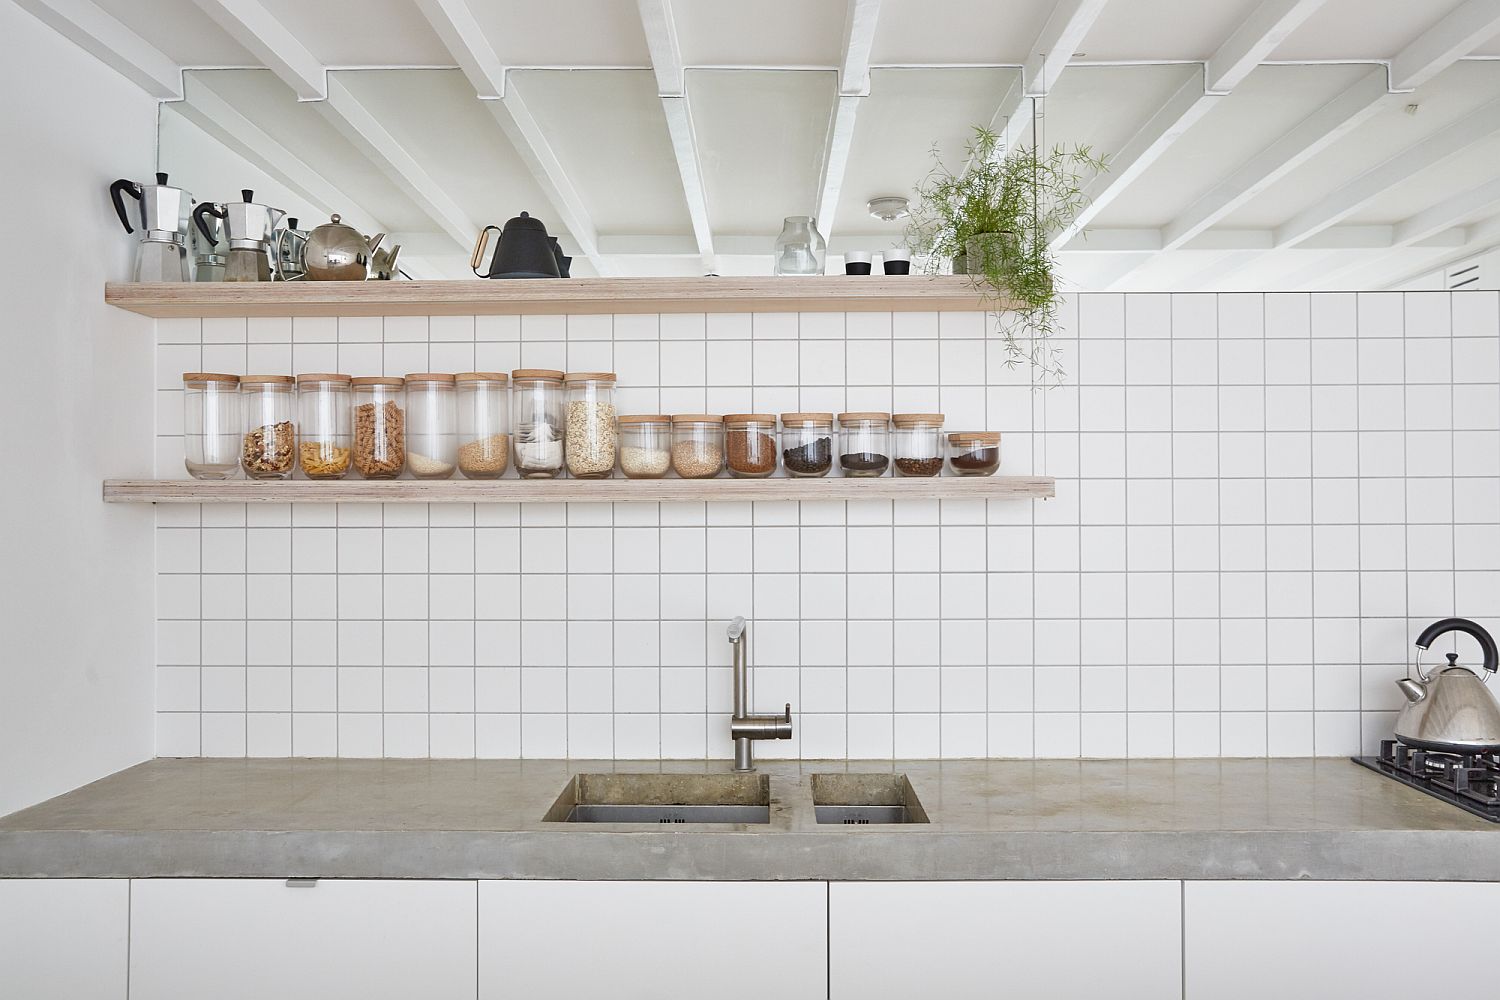 Lovely kitchen in white with subway tiles and open wooden shelves